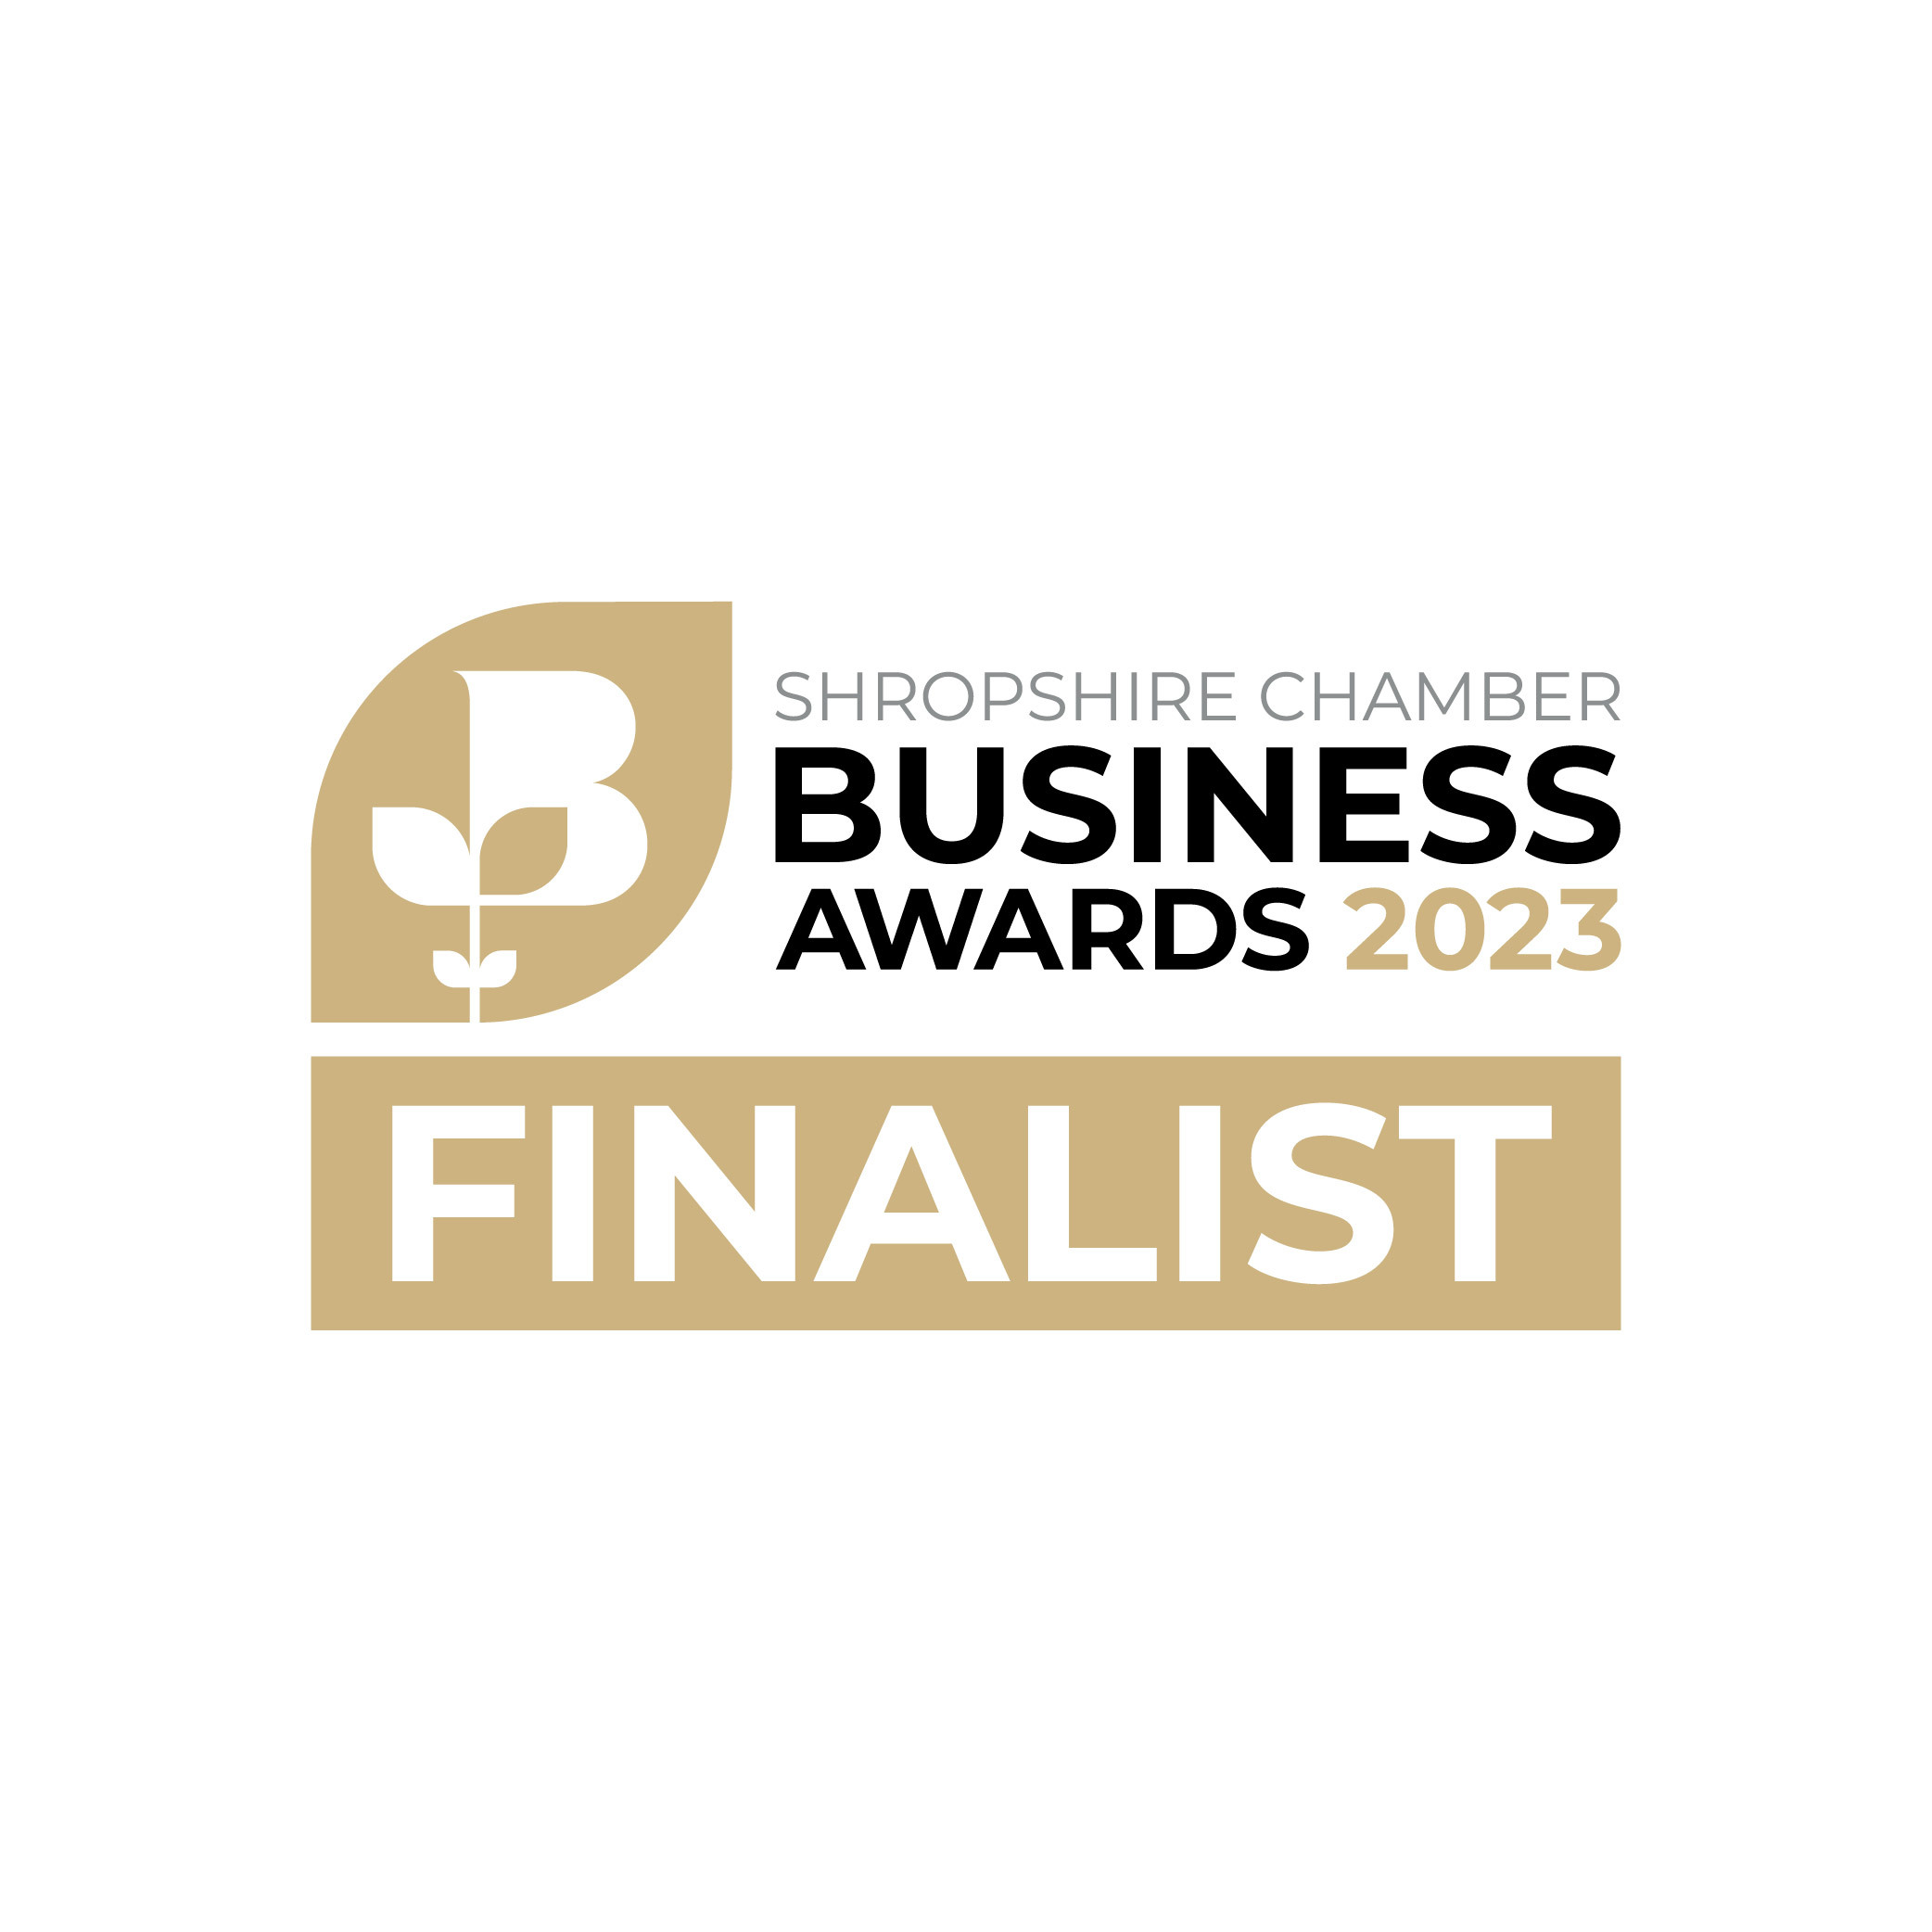 We’re finalists! Company and Young Business Person of the Year